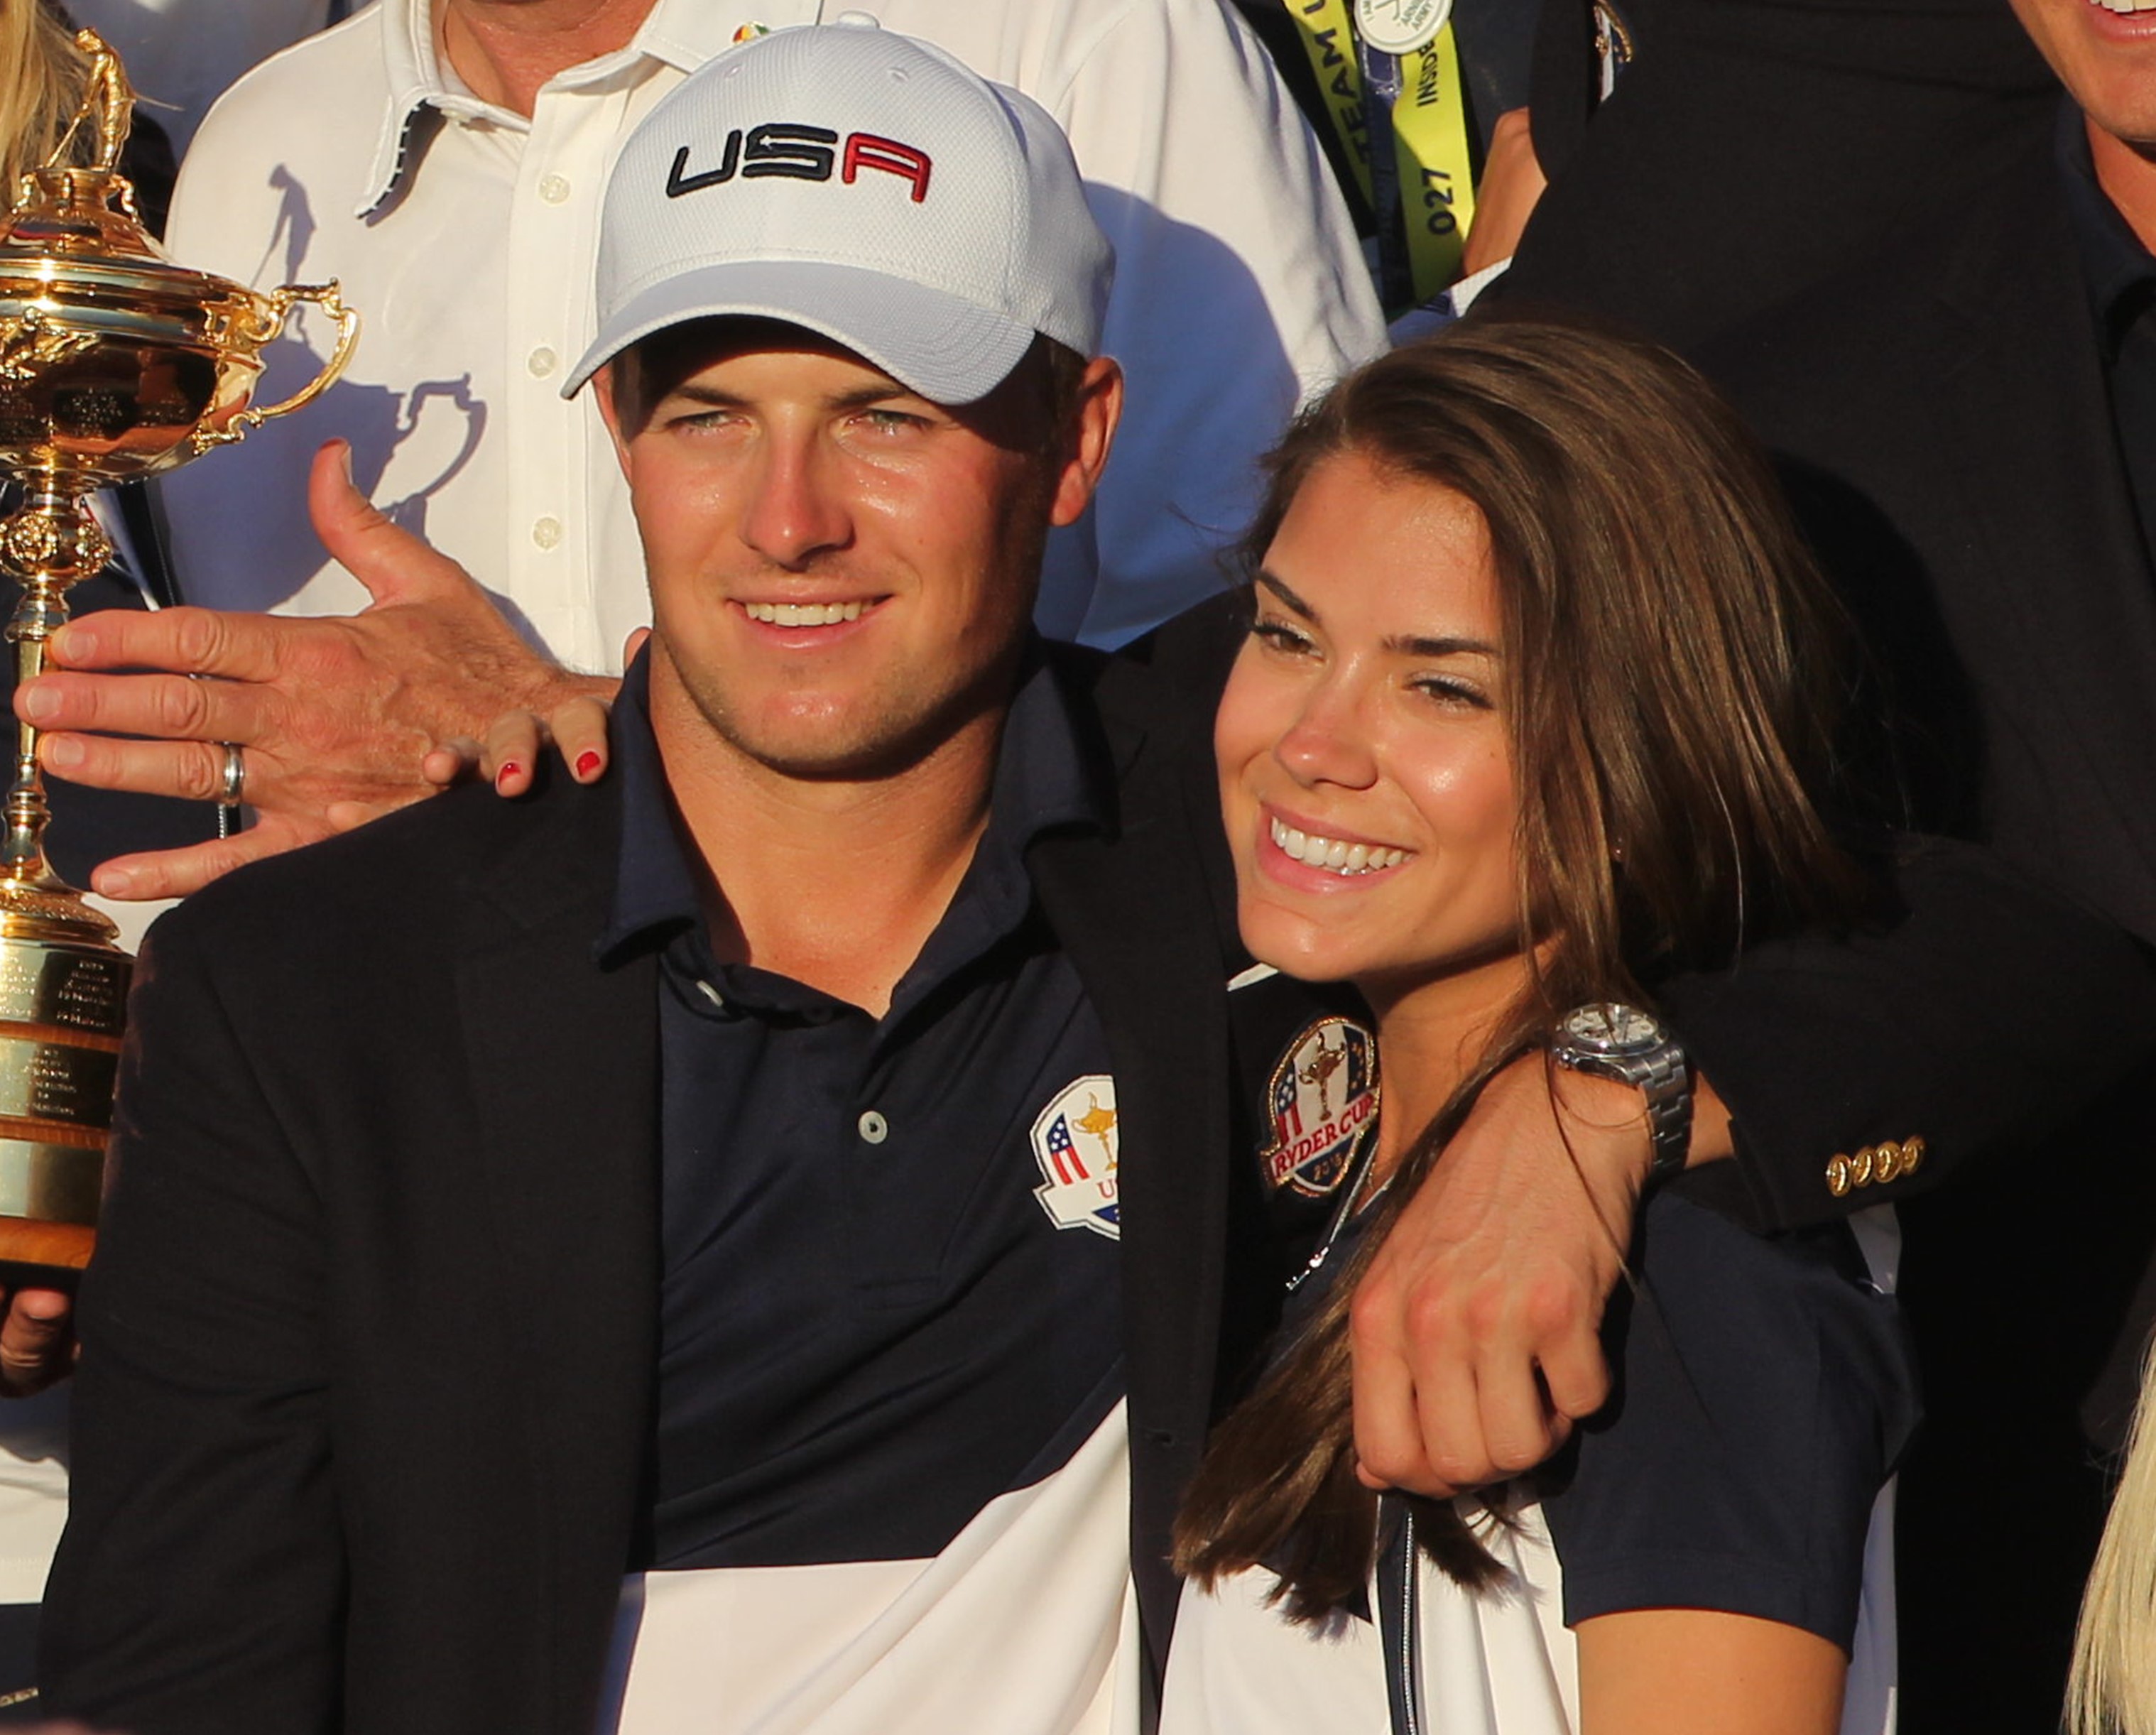 Jordan Spieth with his arm around his partner Annie Verret as the U.S. team players and their spouses celebrate with the Ryder Cup